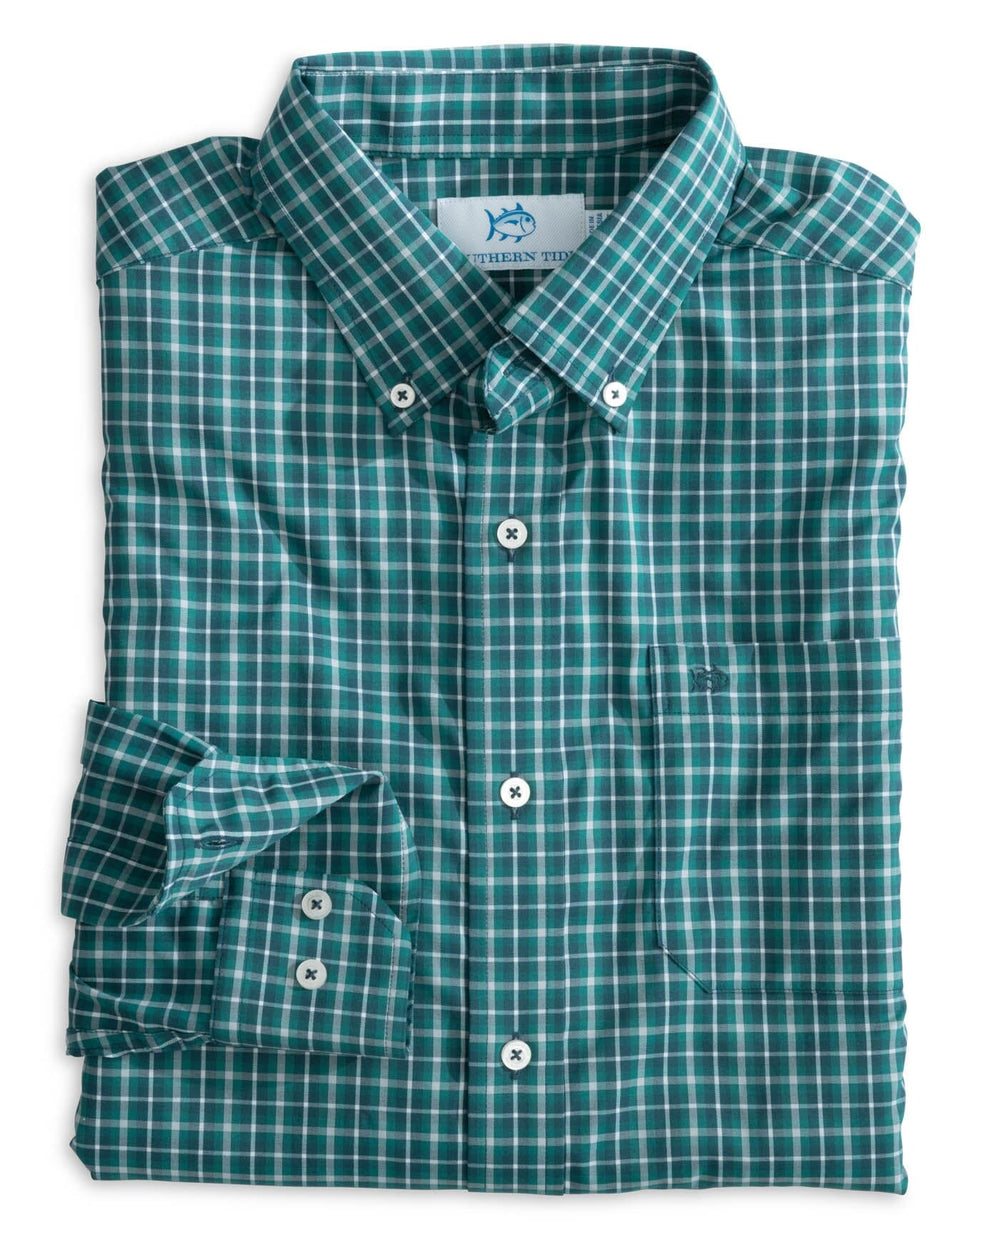 The front view of the Southern Tide Intercoastal Ardmore Plaid Long Sleeve Sportshirt by Southern Tide - Georgian Bay Green